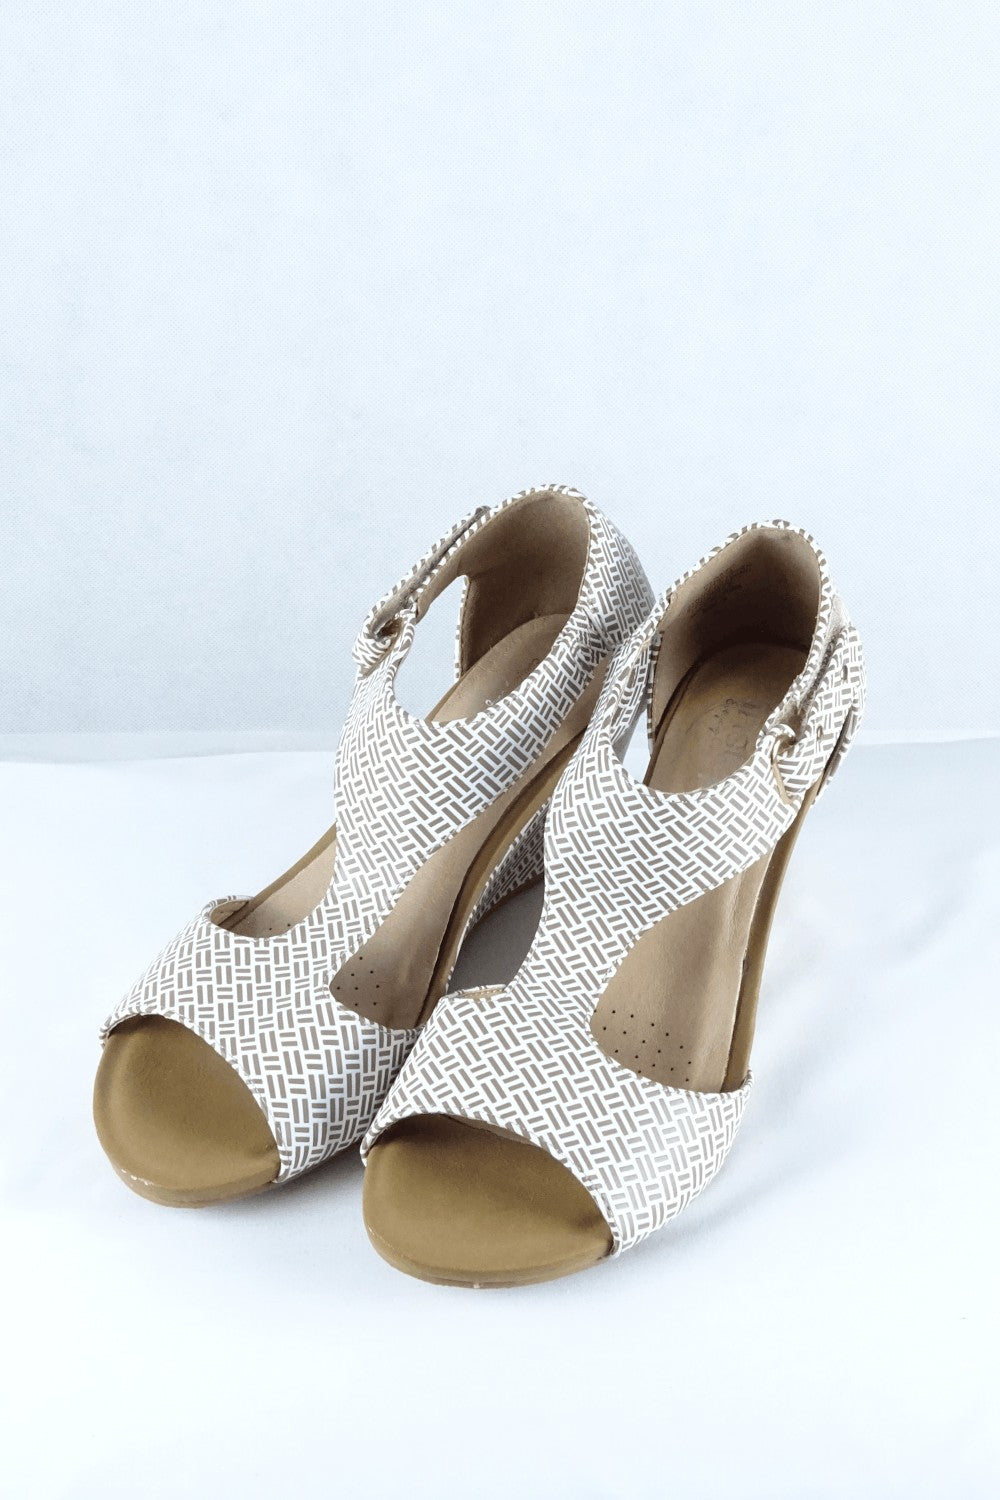 Instep Brown And White Pattern Sandal 9 AU